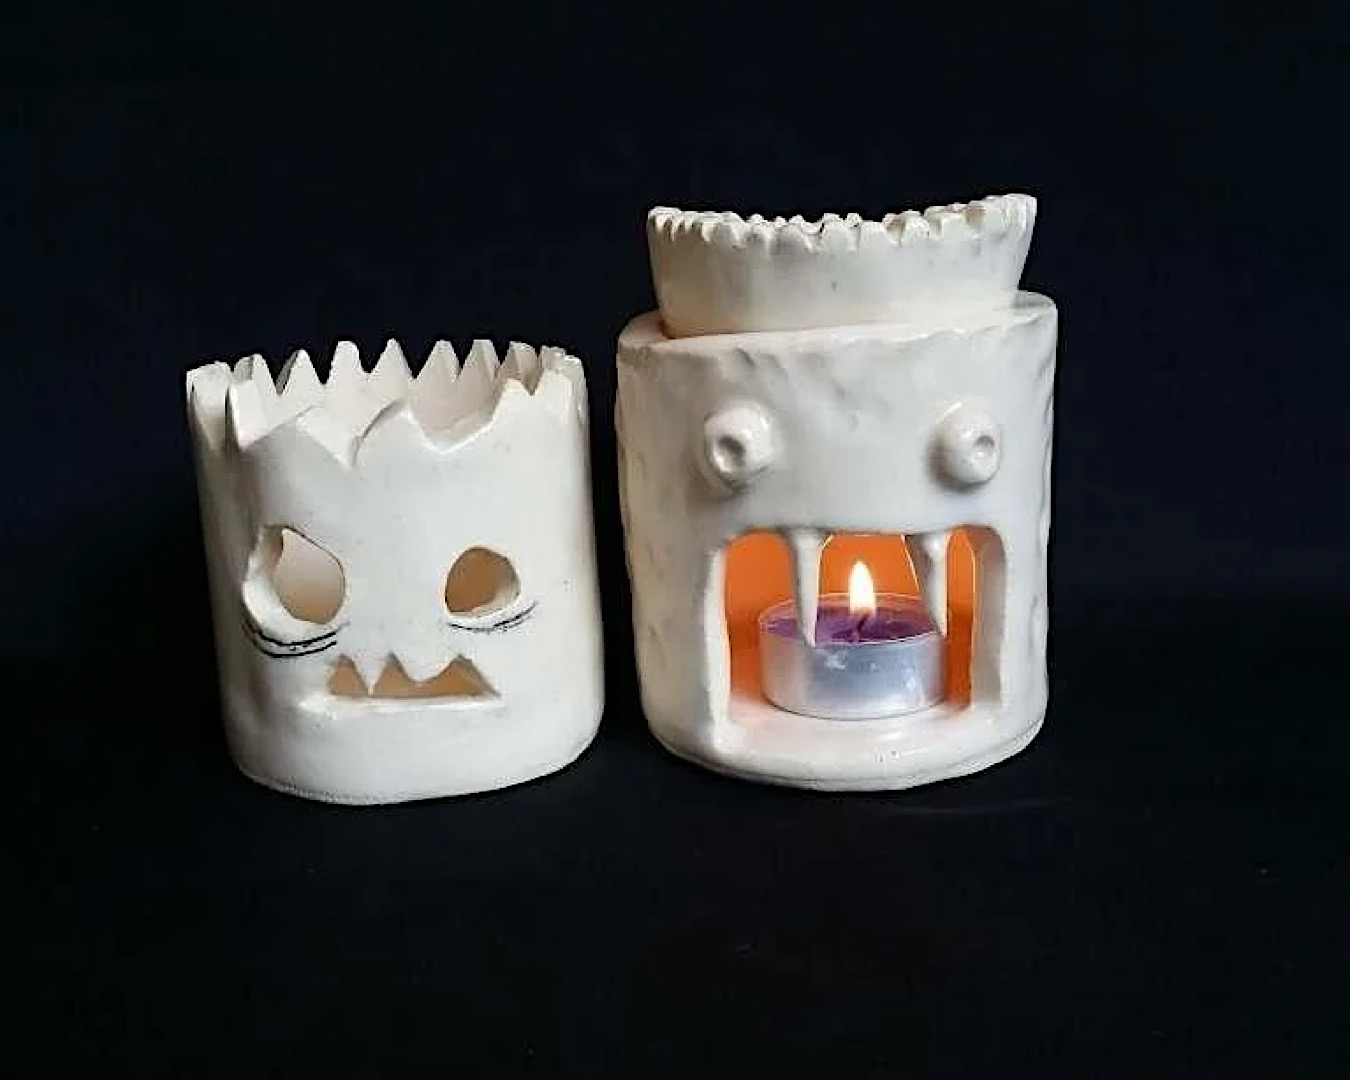 Two spooky lanterns made out of clay levitate on a black background as if by some Halloween sorcery. 